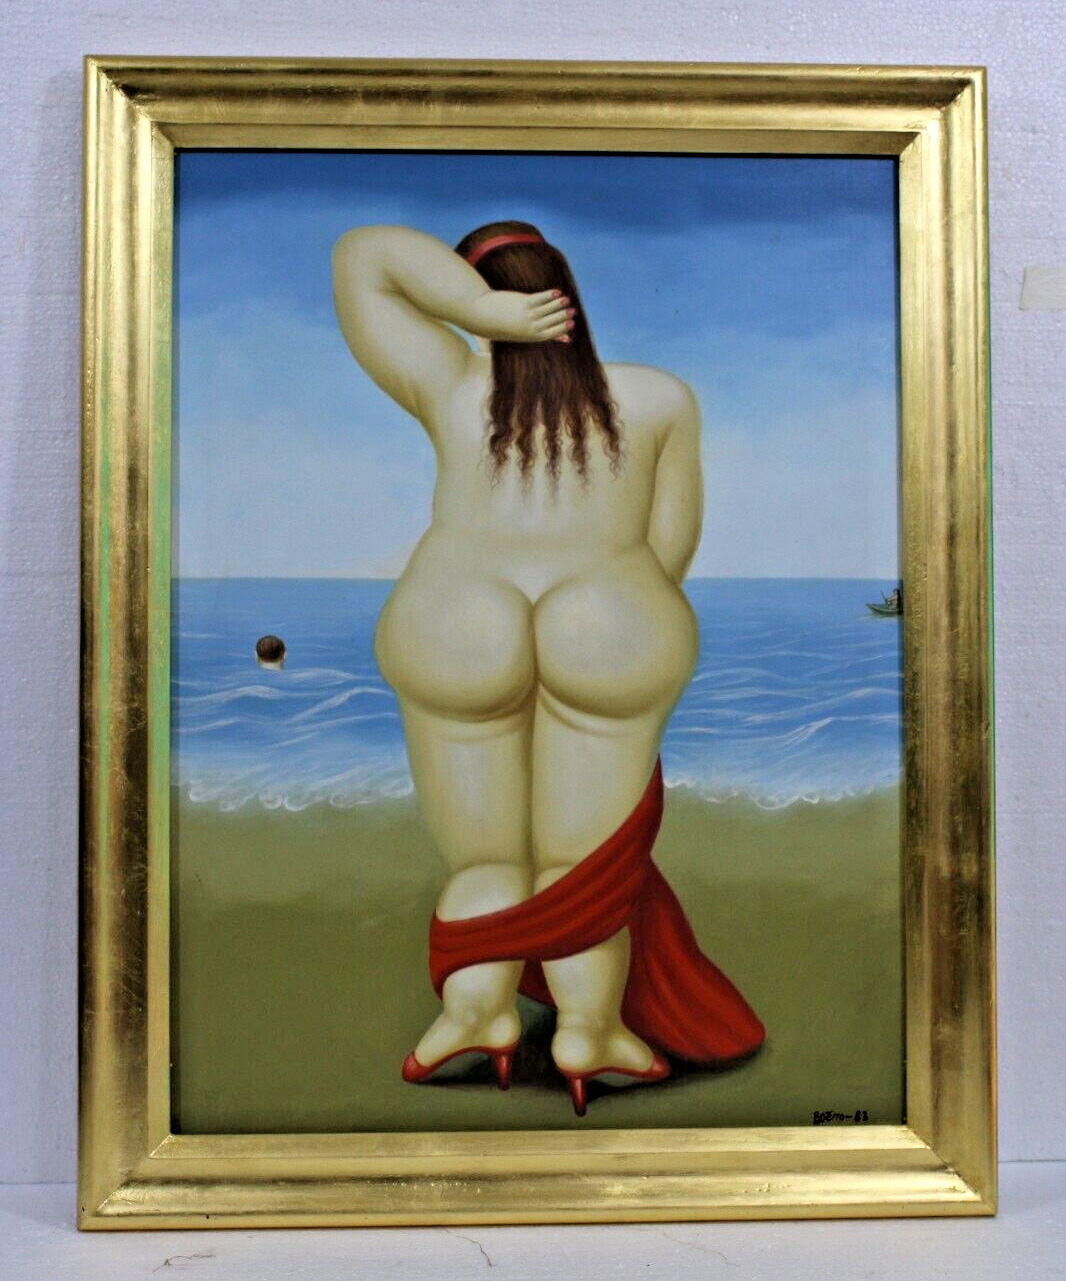 FERNANDO BOTERO OIL ON CANVAS WITH FRAME IN GOLDEN LEAF \